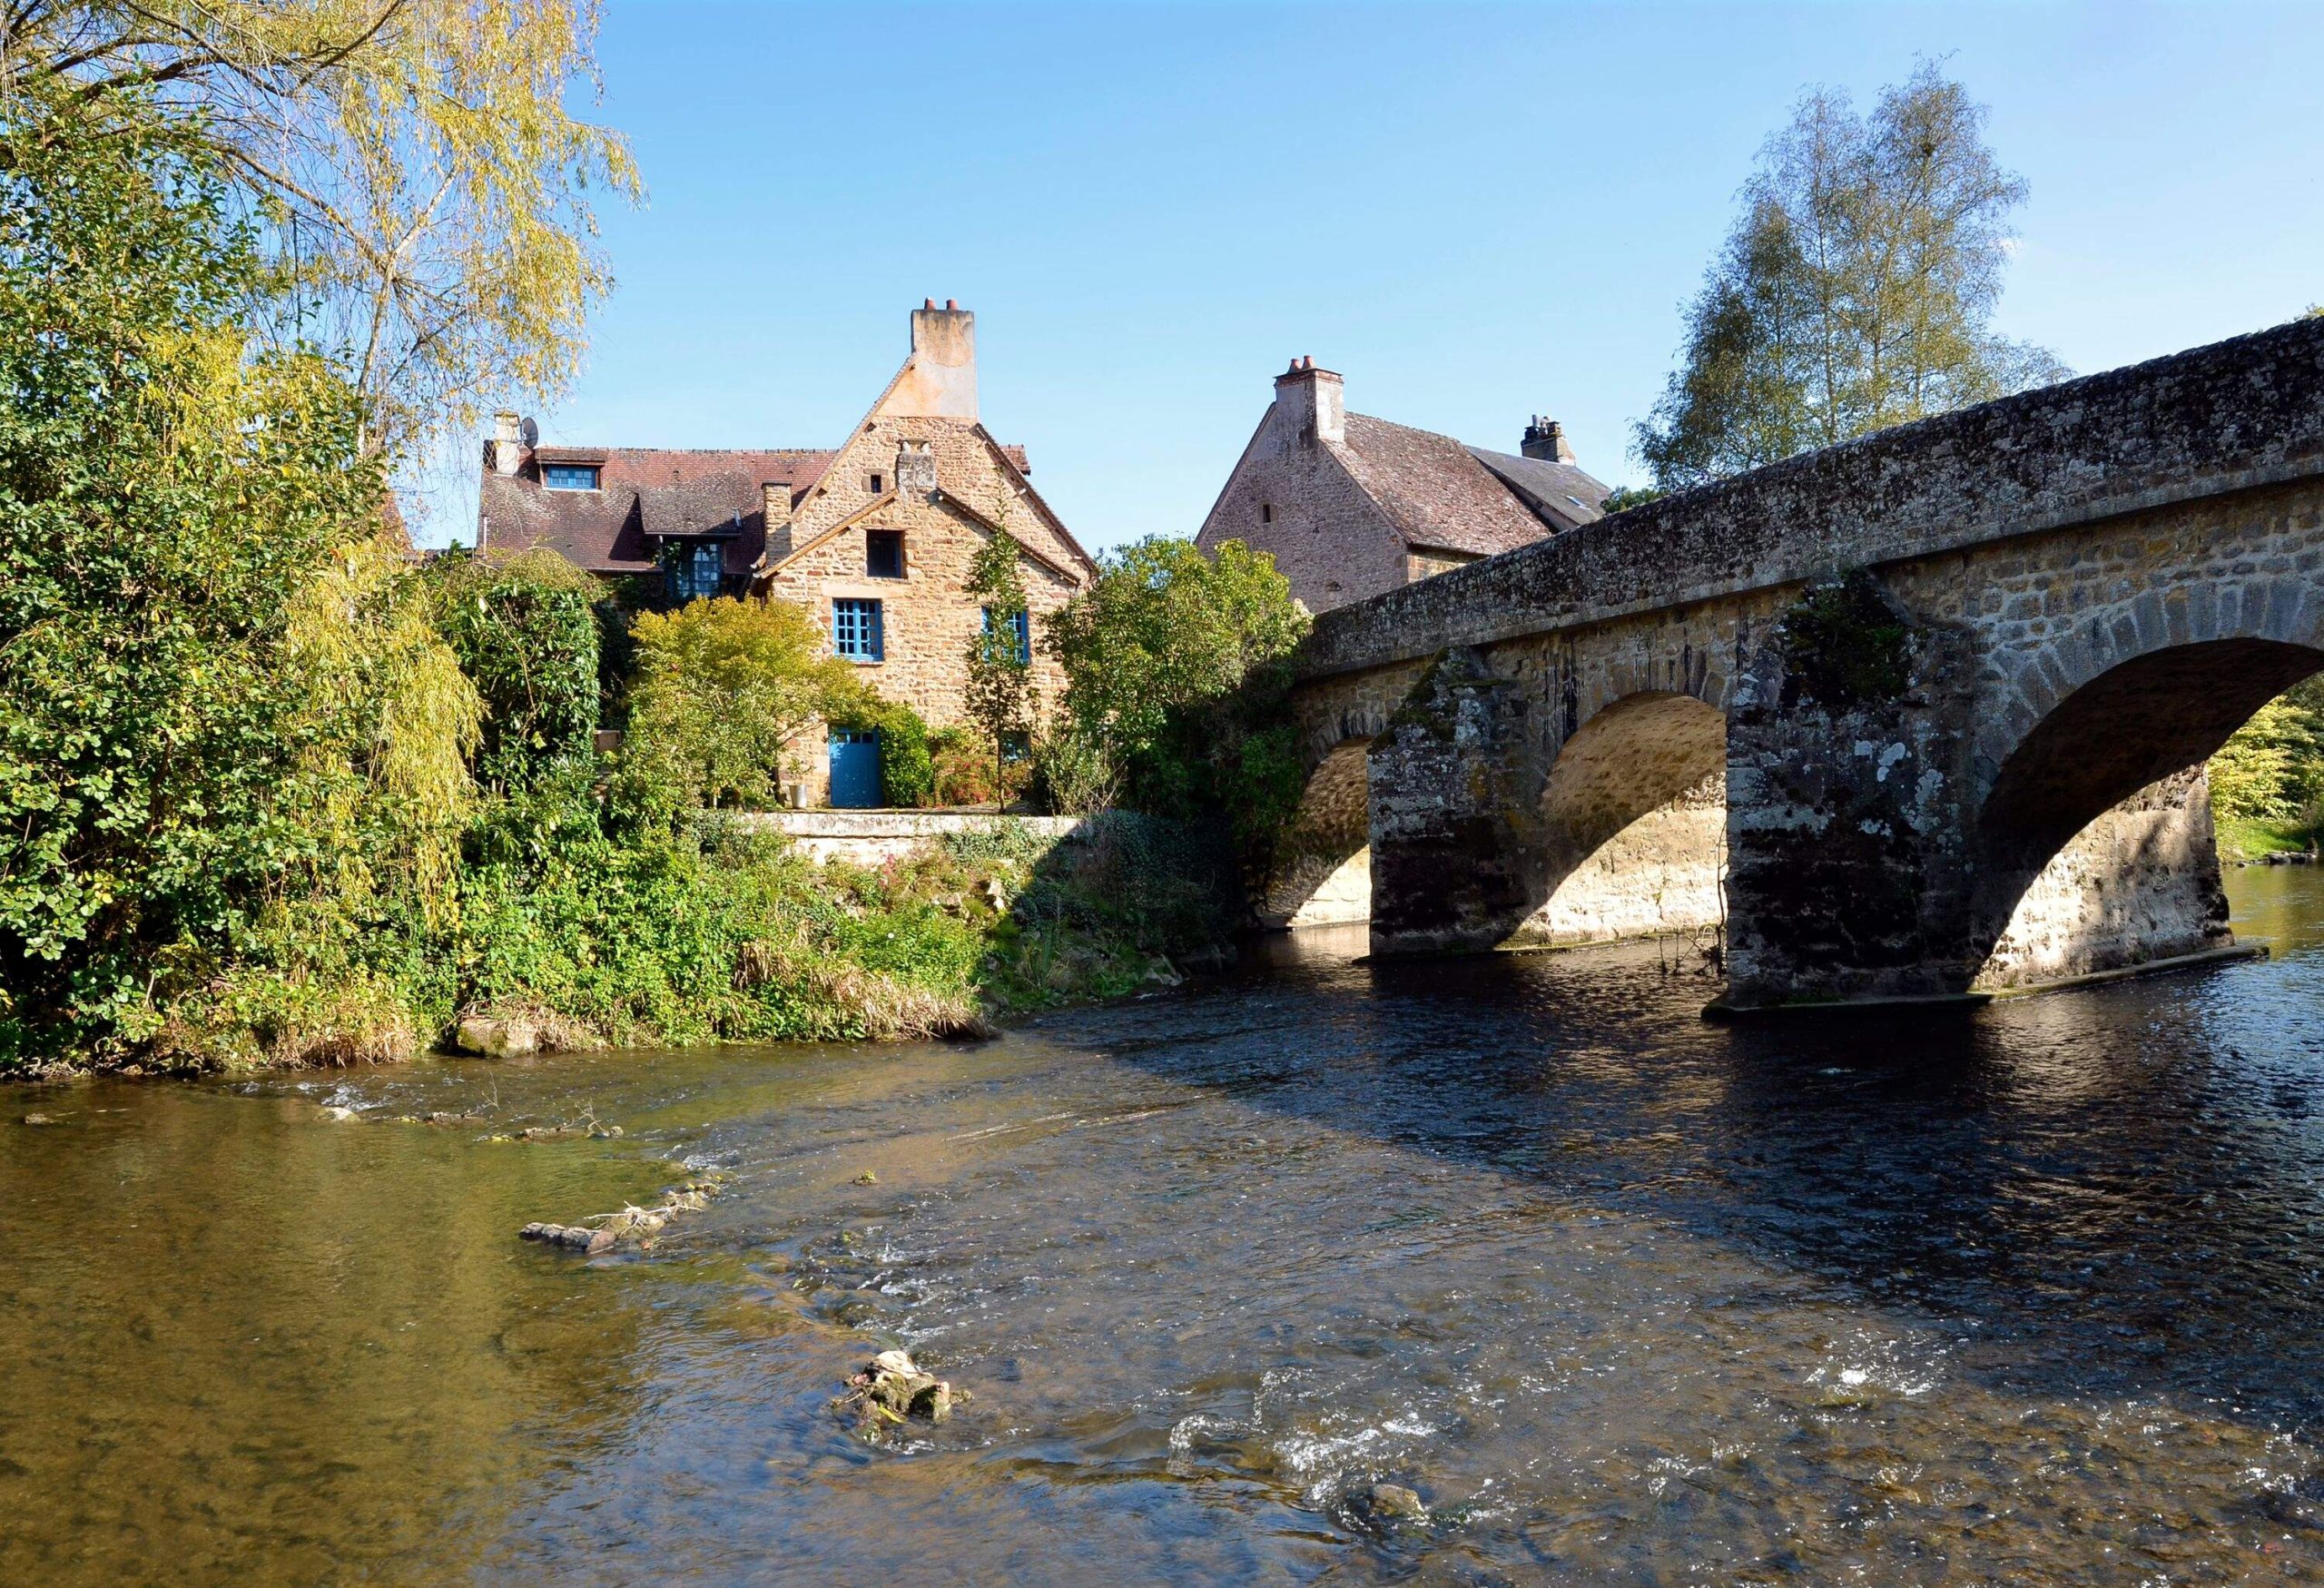 Panoramic the river Sarthe and old bridge of village Saint-Céneri-le-Gérei (“France’s Most Beautiful Villages”) ,department of the Orne, region Basse Normandie in France